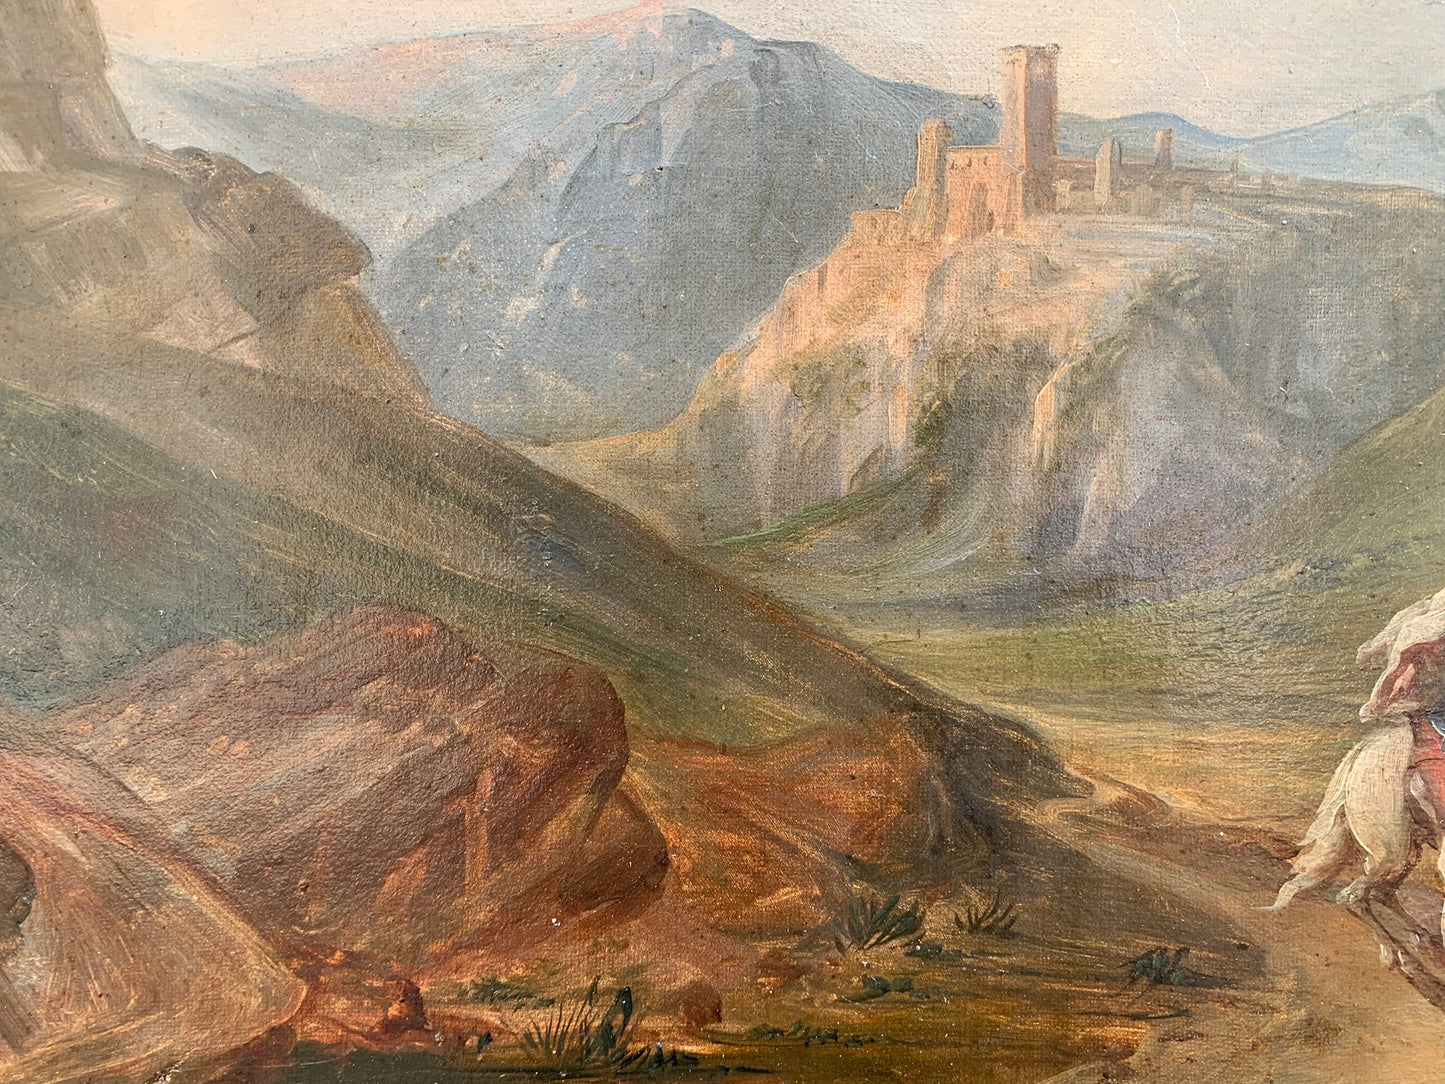 Fortress. Atlas Mountains with Berbers. Maroc. 19th century.